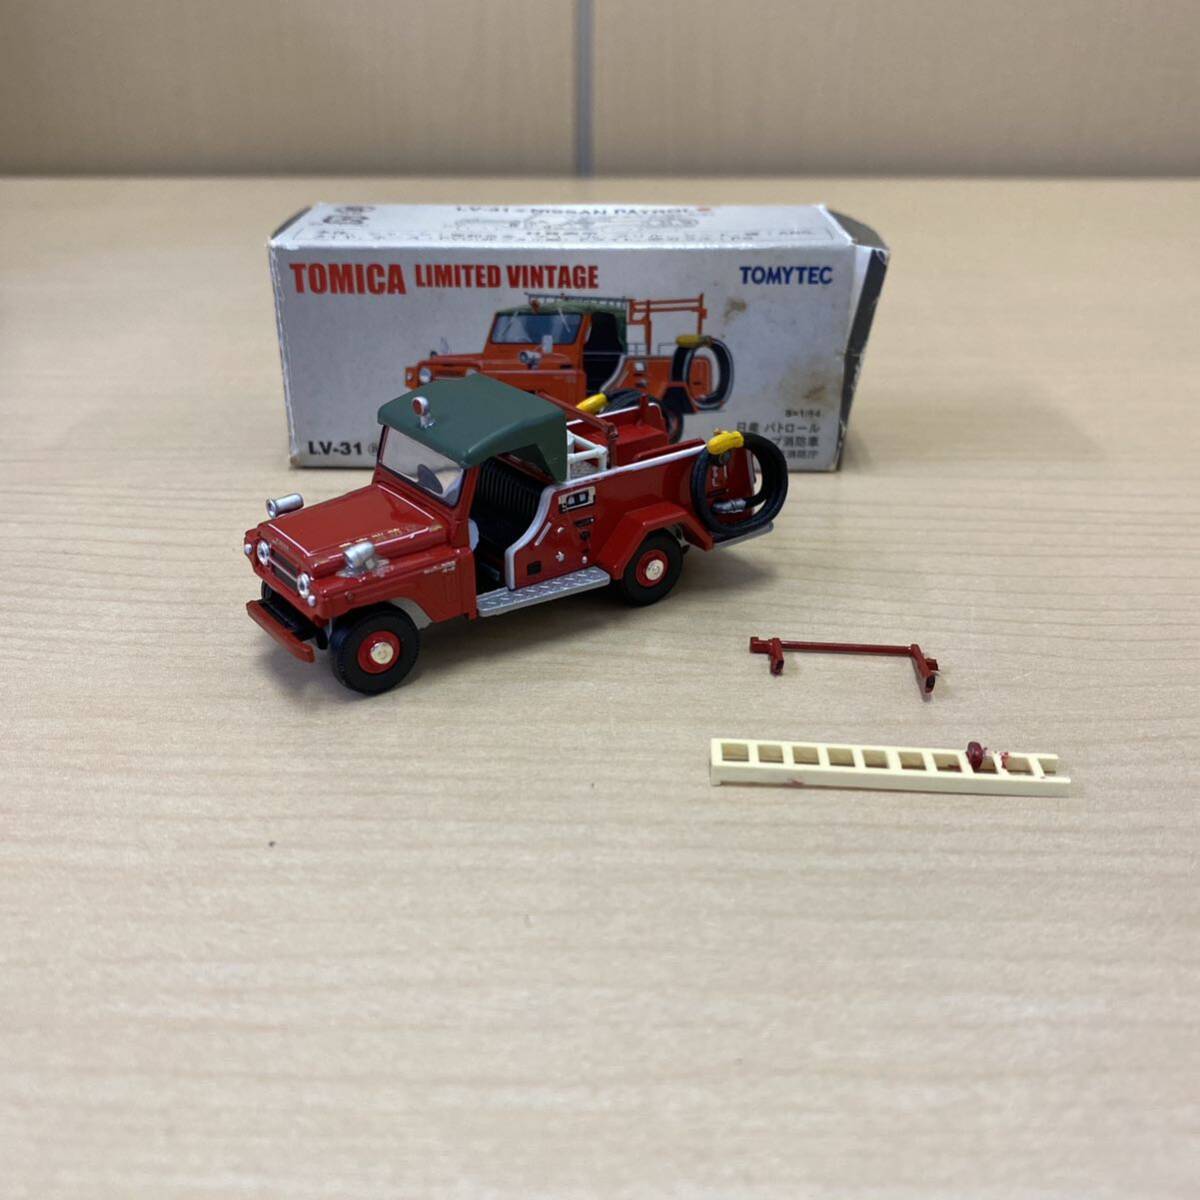 [TS0421(87)] Tomica Limited Vintage Nissan Patrol pump fire-engine Tokyo fire fighting . damage equipped that time thing junk 